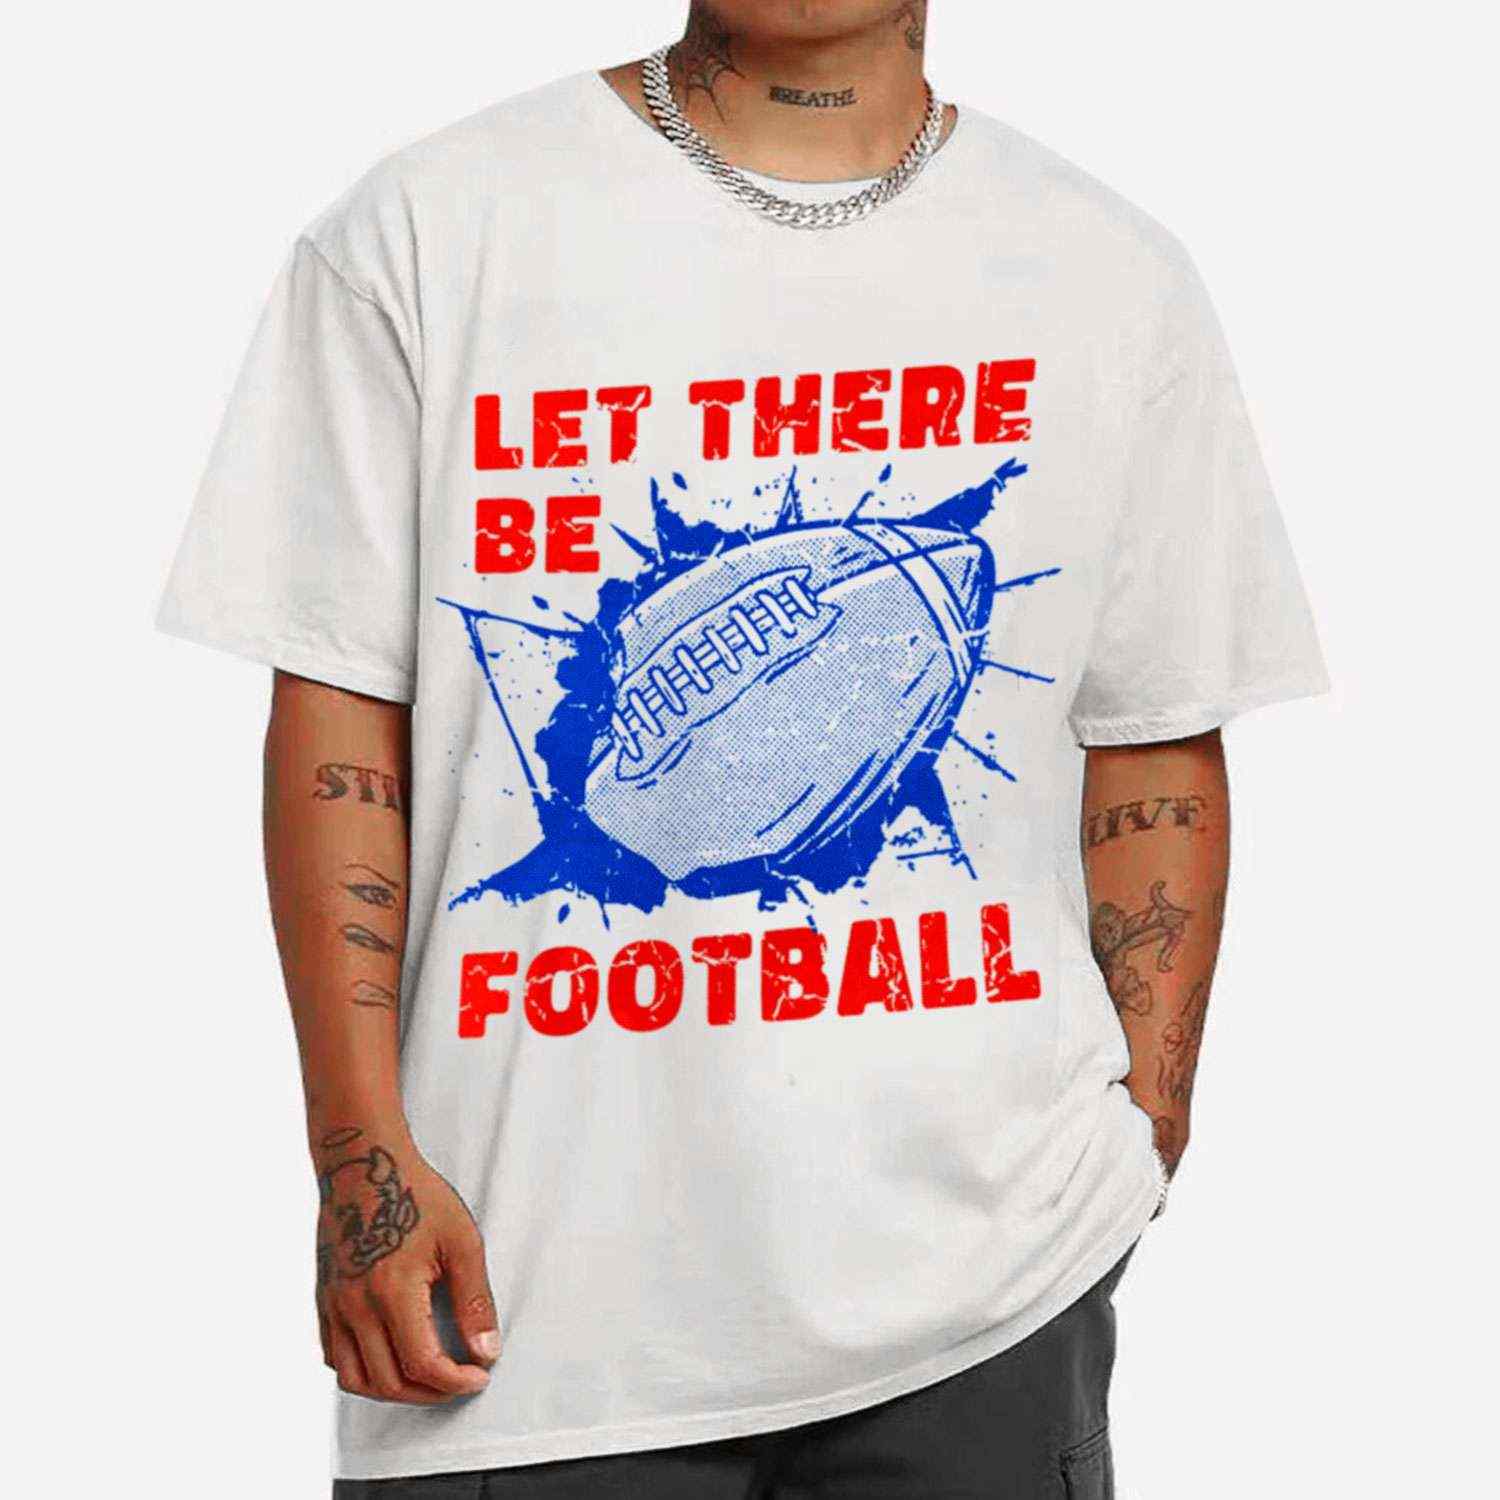 Let There Be Football T-shirt